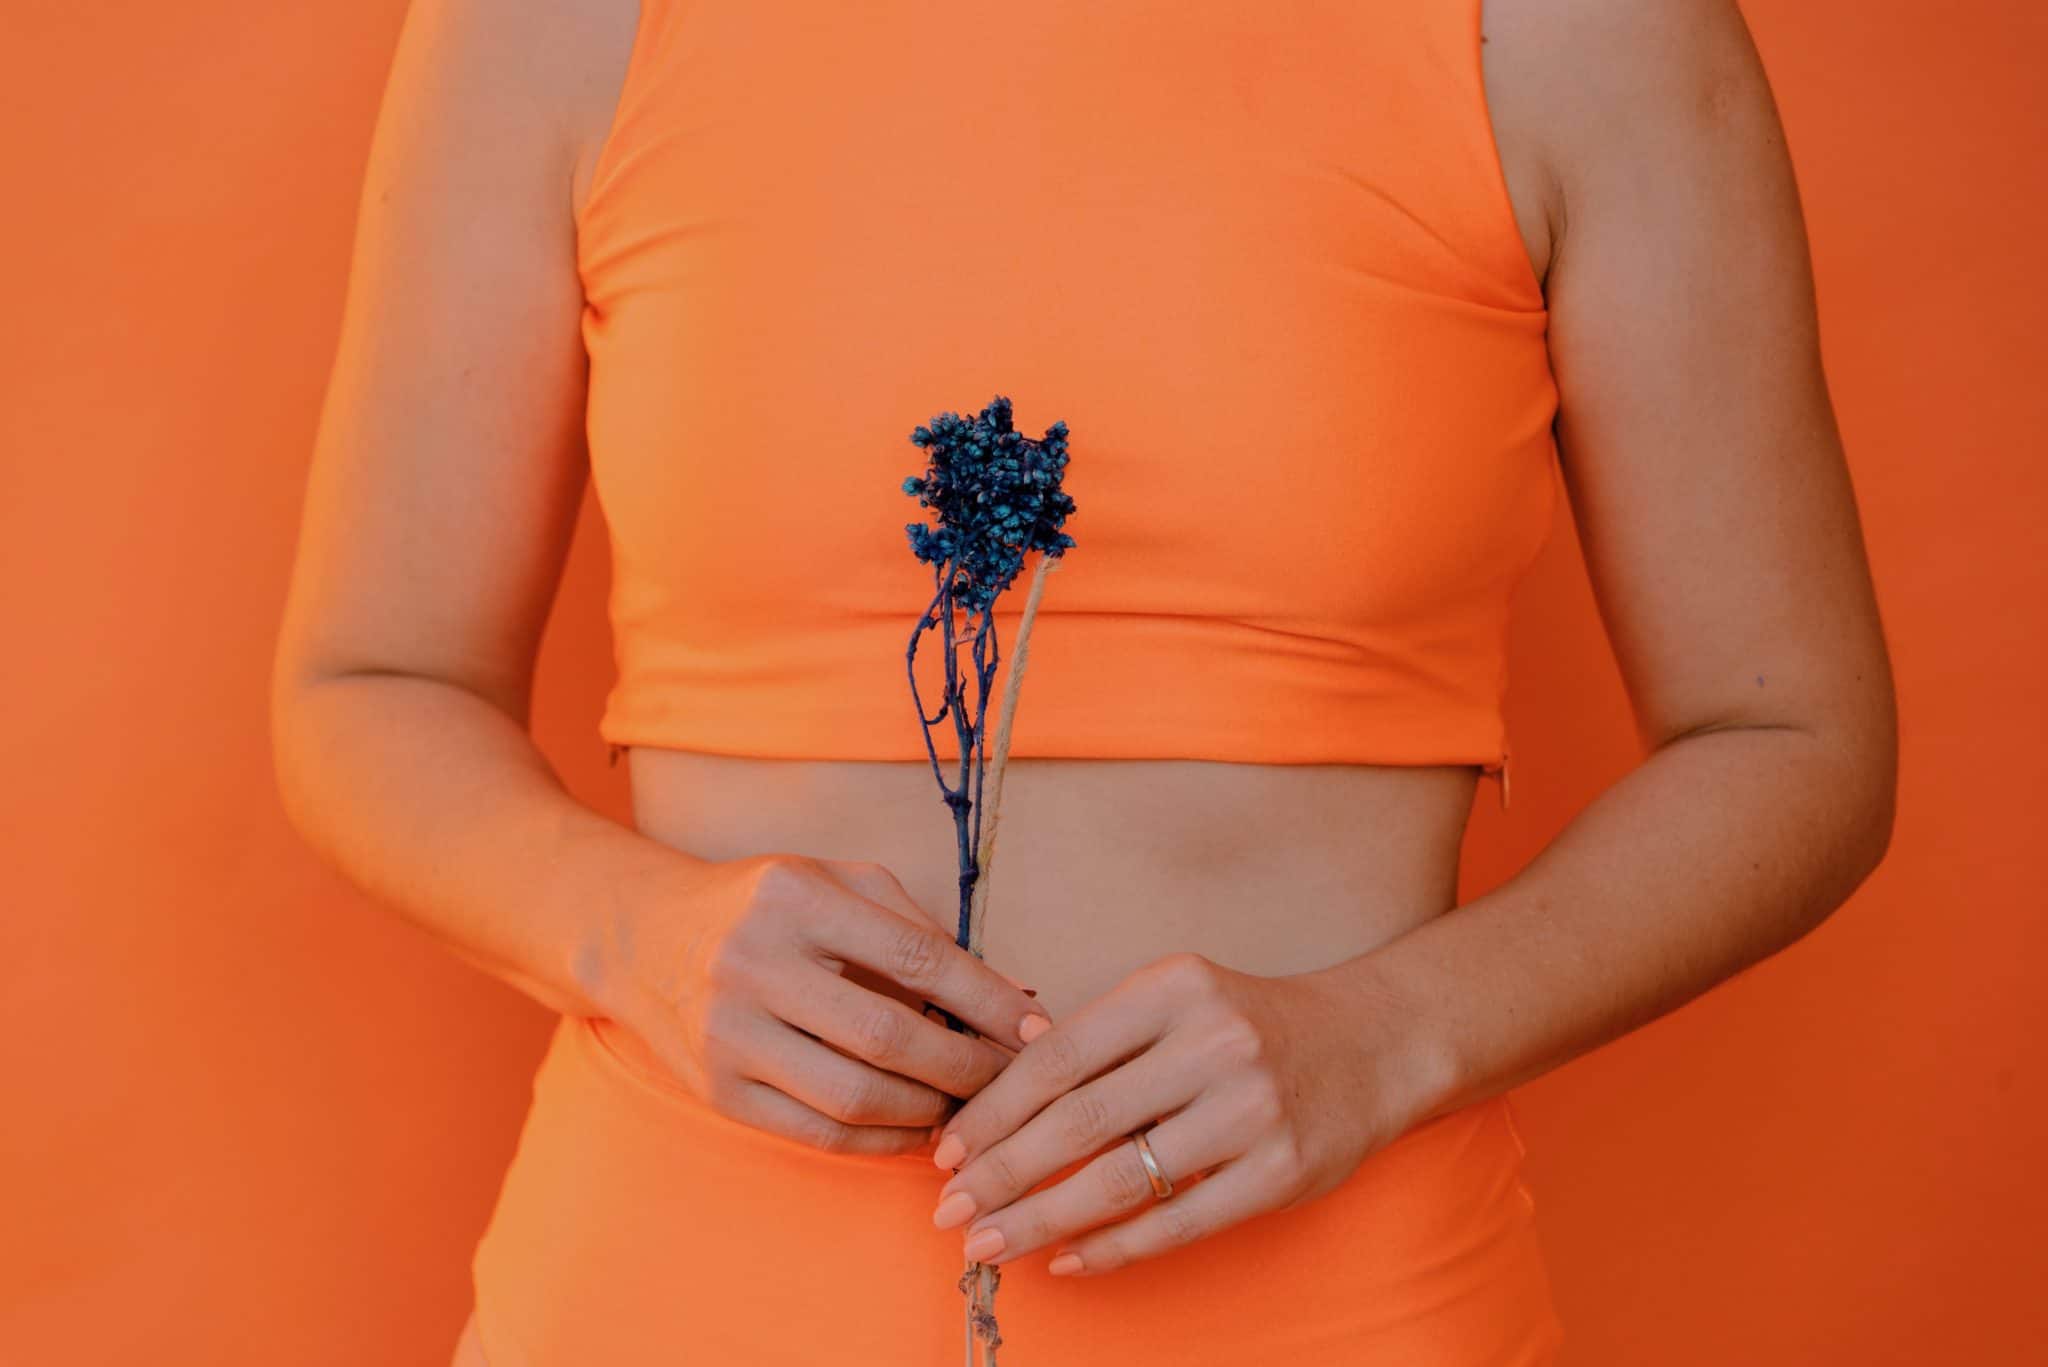 woman standing in orange exercise apparel holding a blue flower against an orange background 